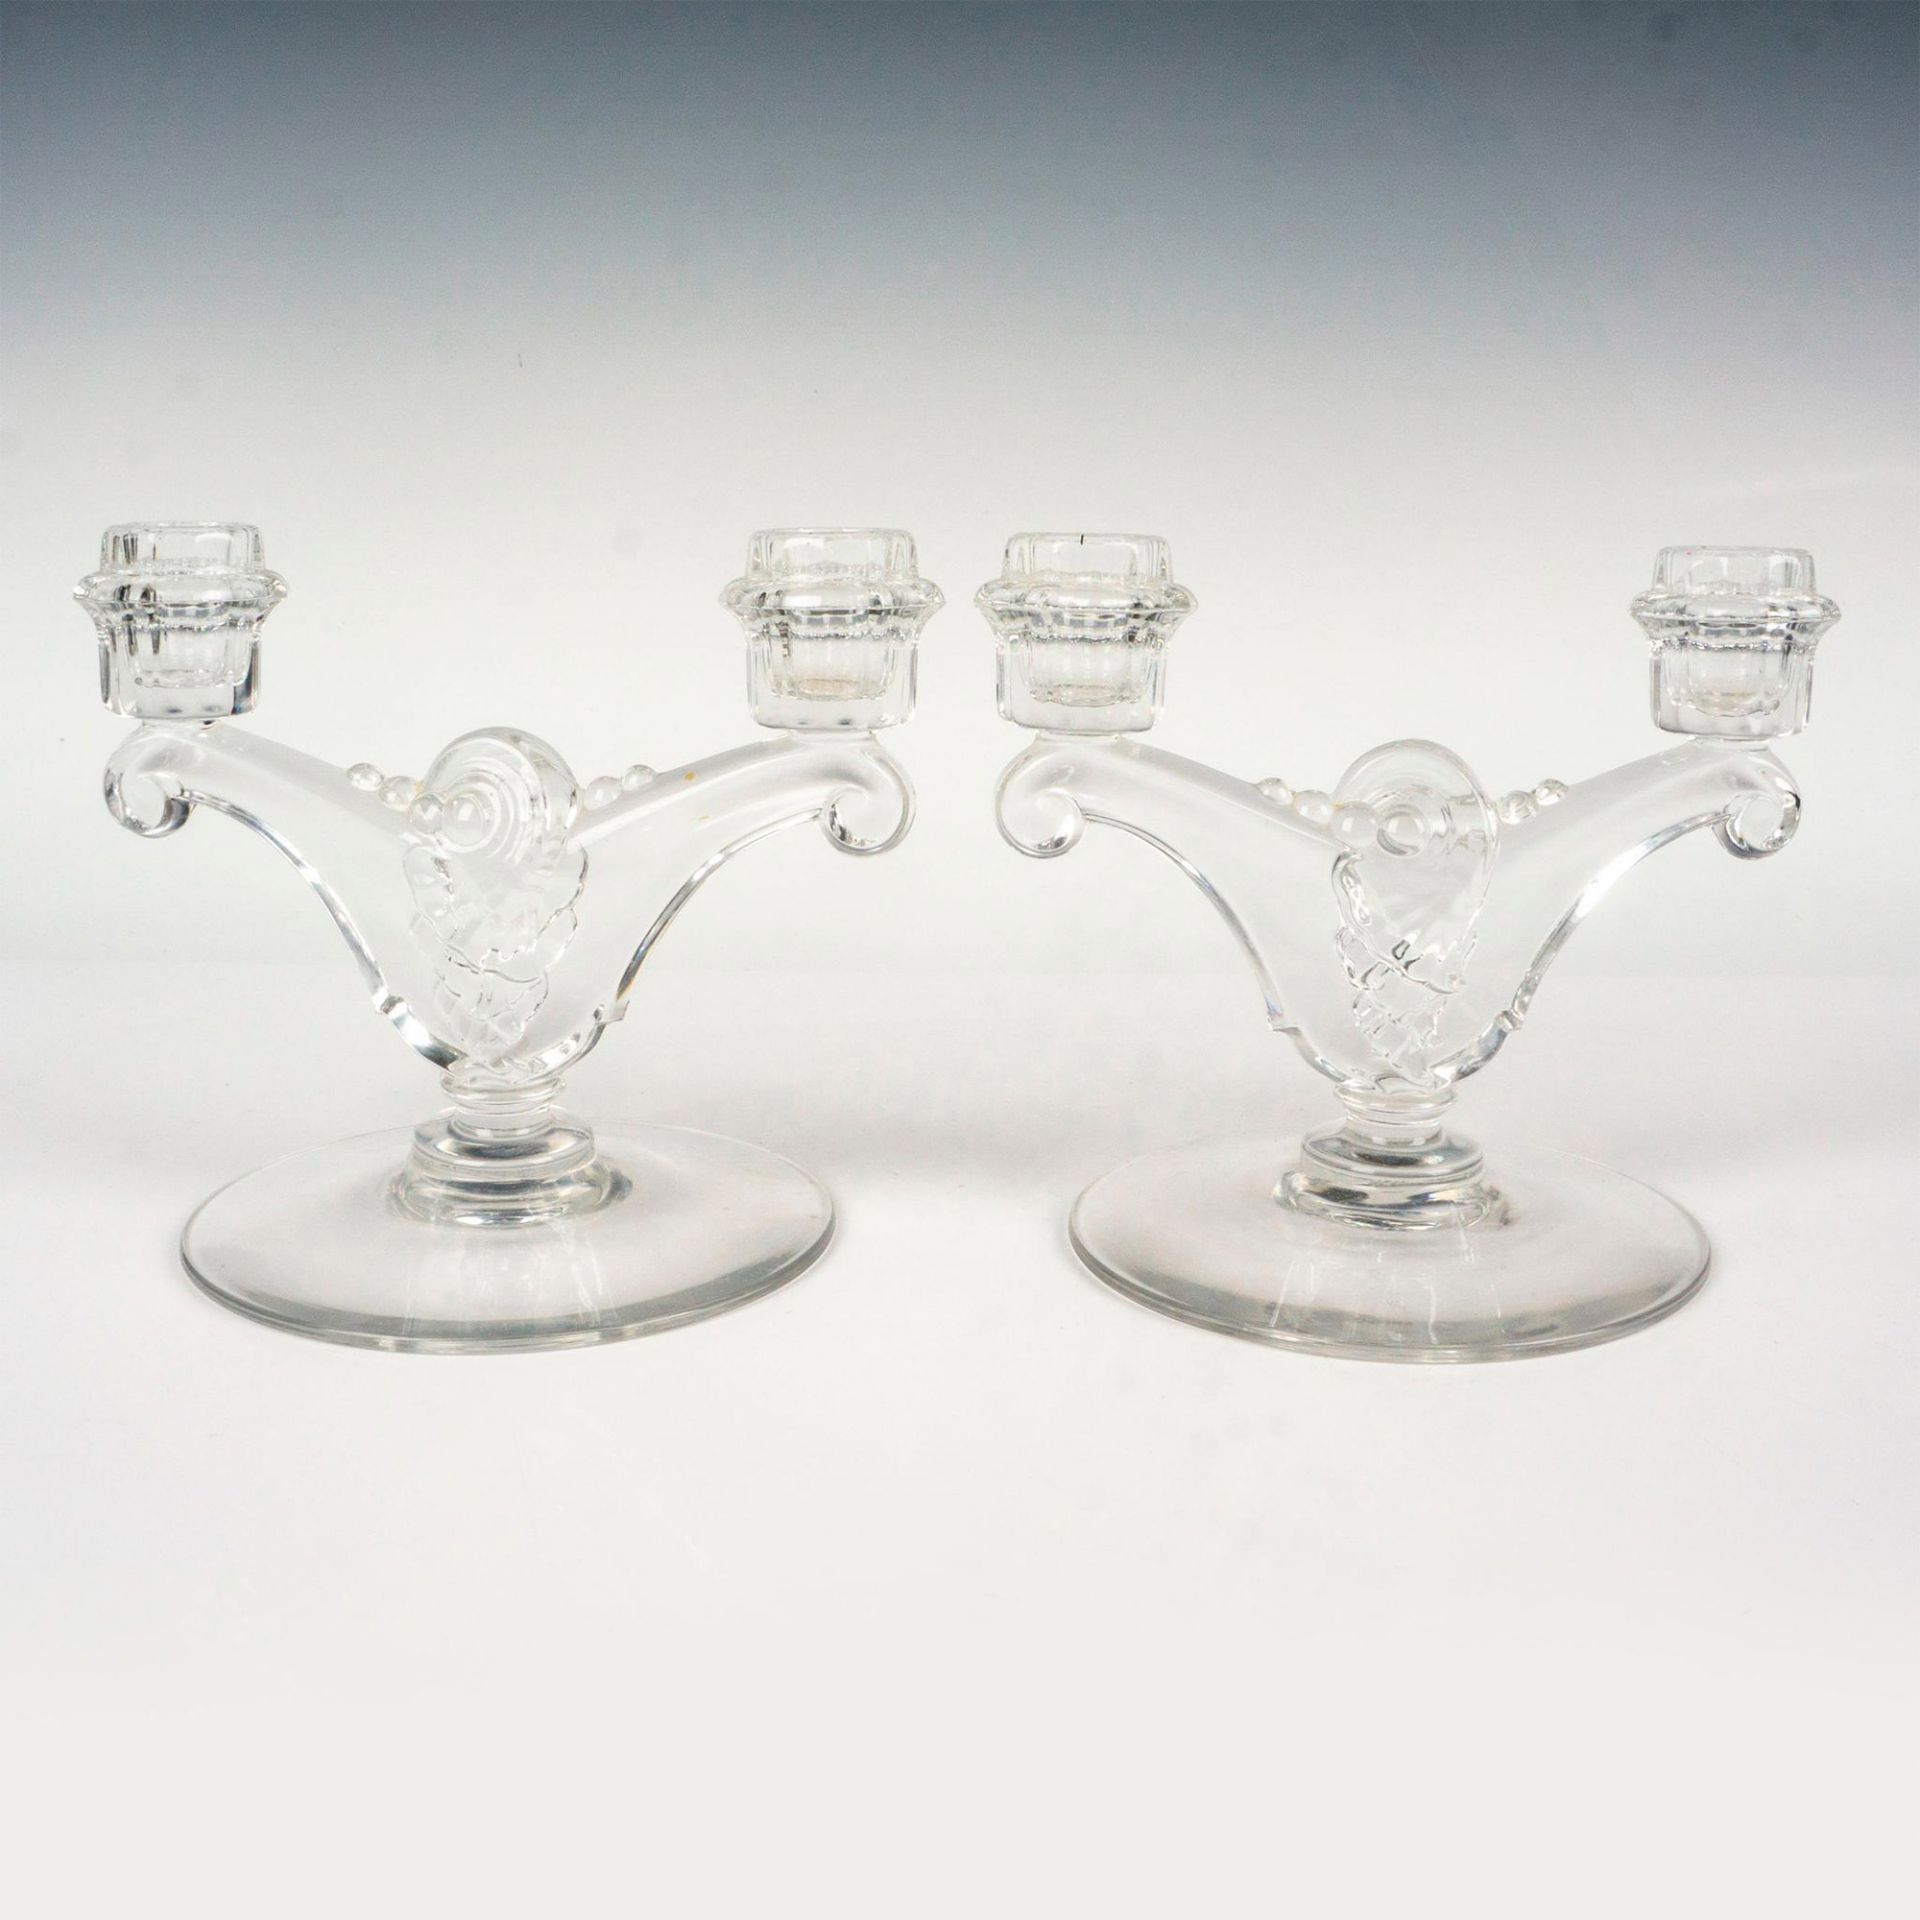 Pair of Heisey Double Candlestick Holders, Fern